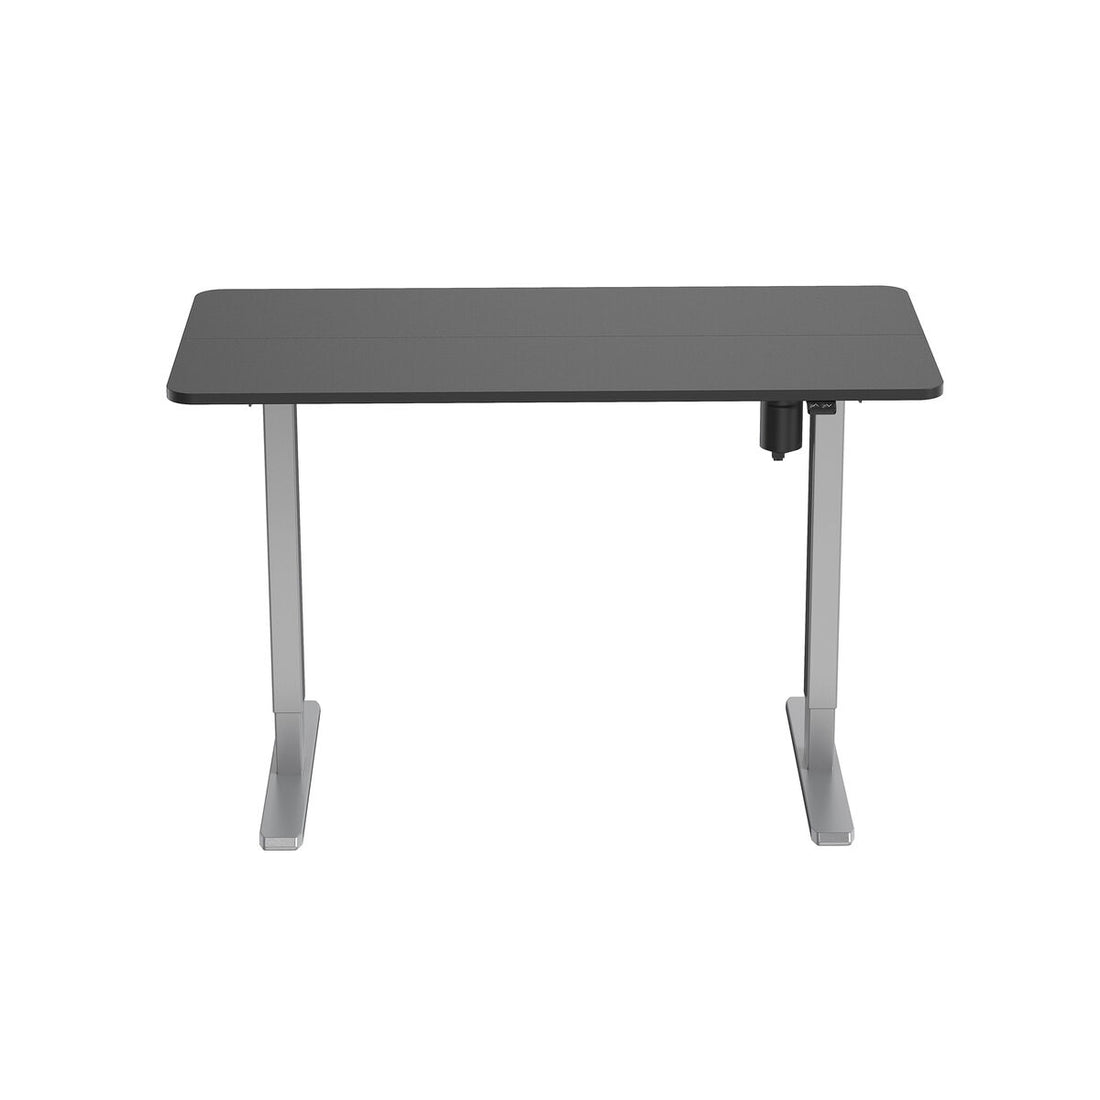 EQUIP ERGO ELECTRIC SIT-STAND DESK FRAME WITH DESKTOP GRAY